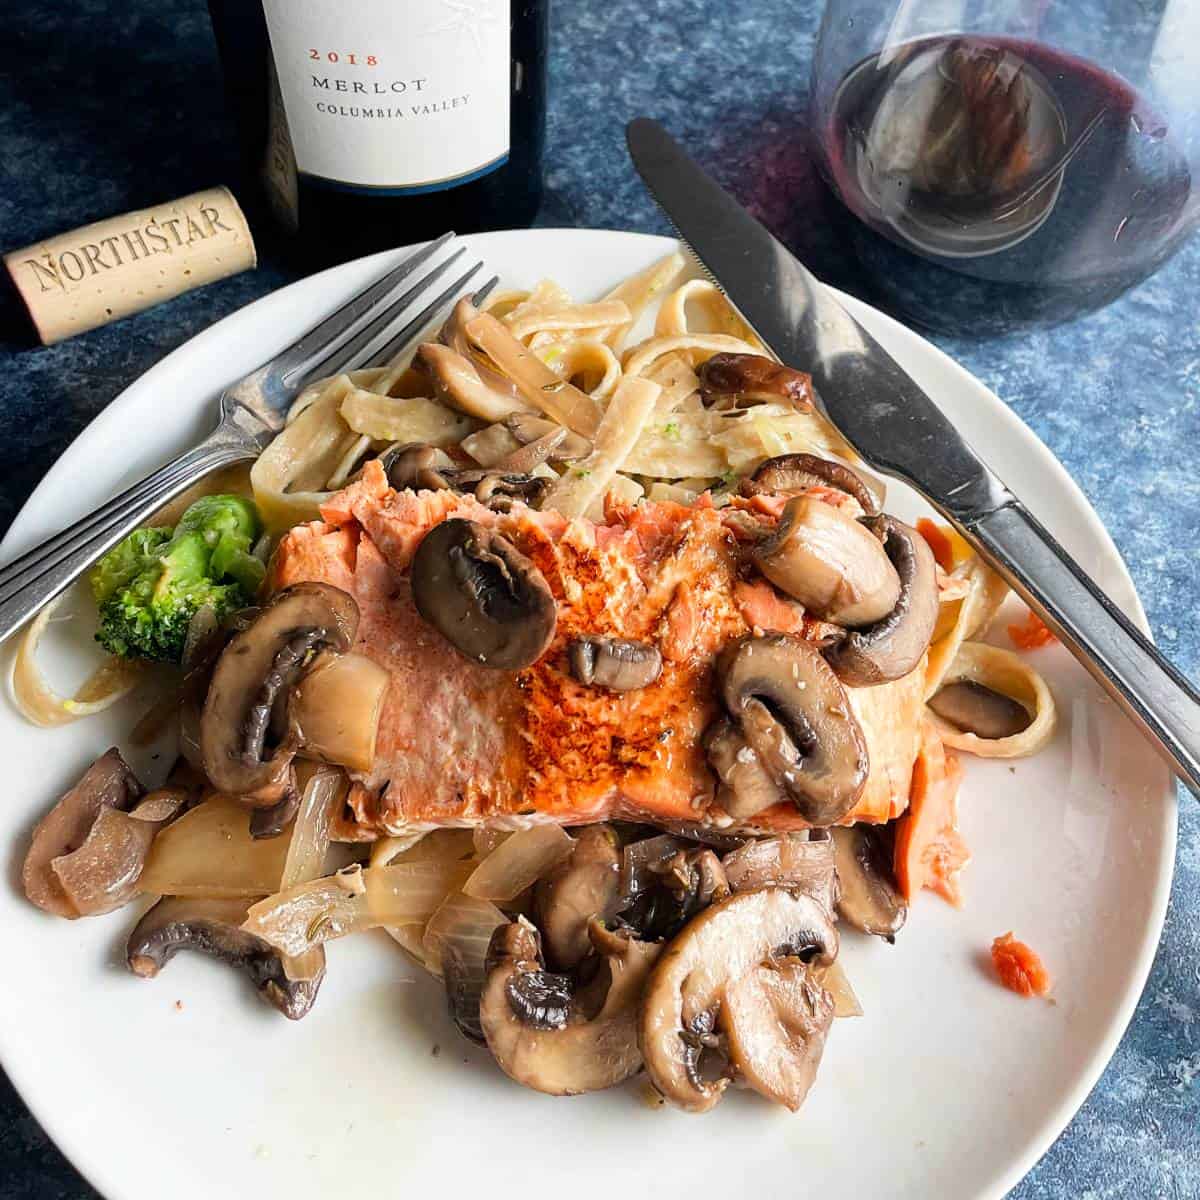 salmon topped with mushrooms, served with pasta and a red Merlot wine.